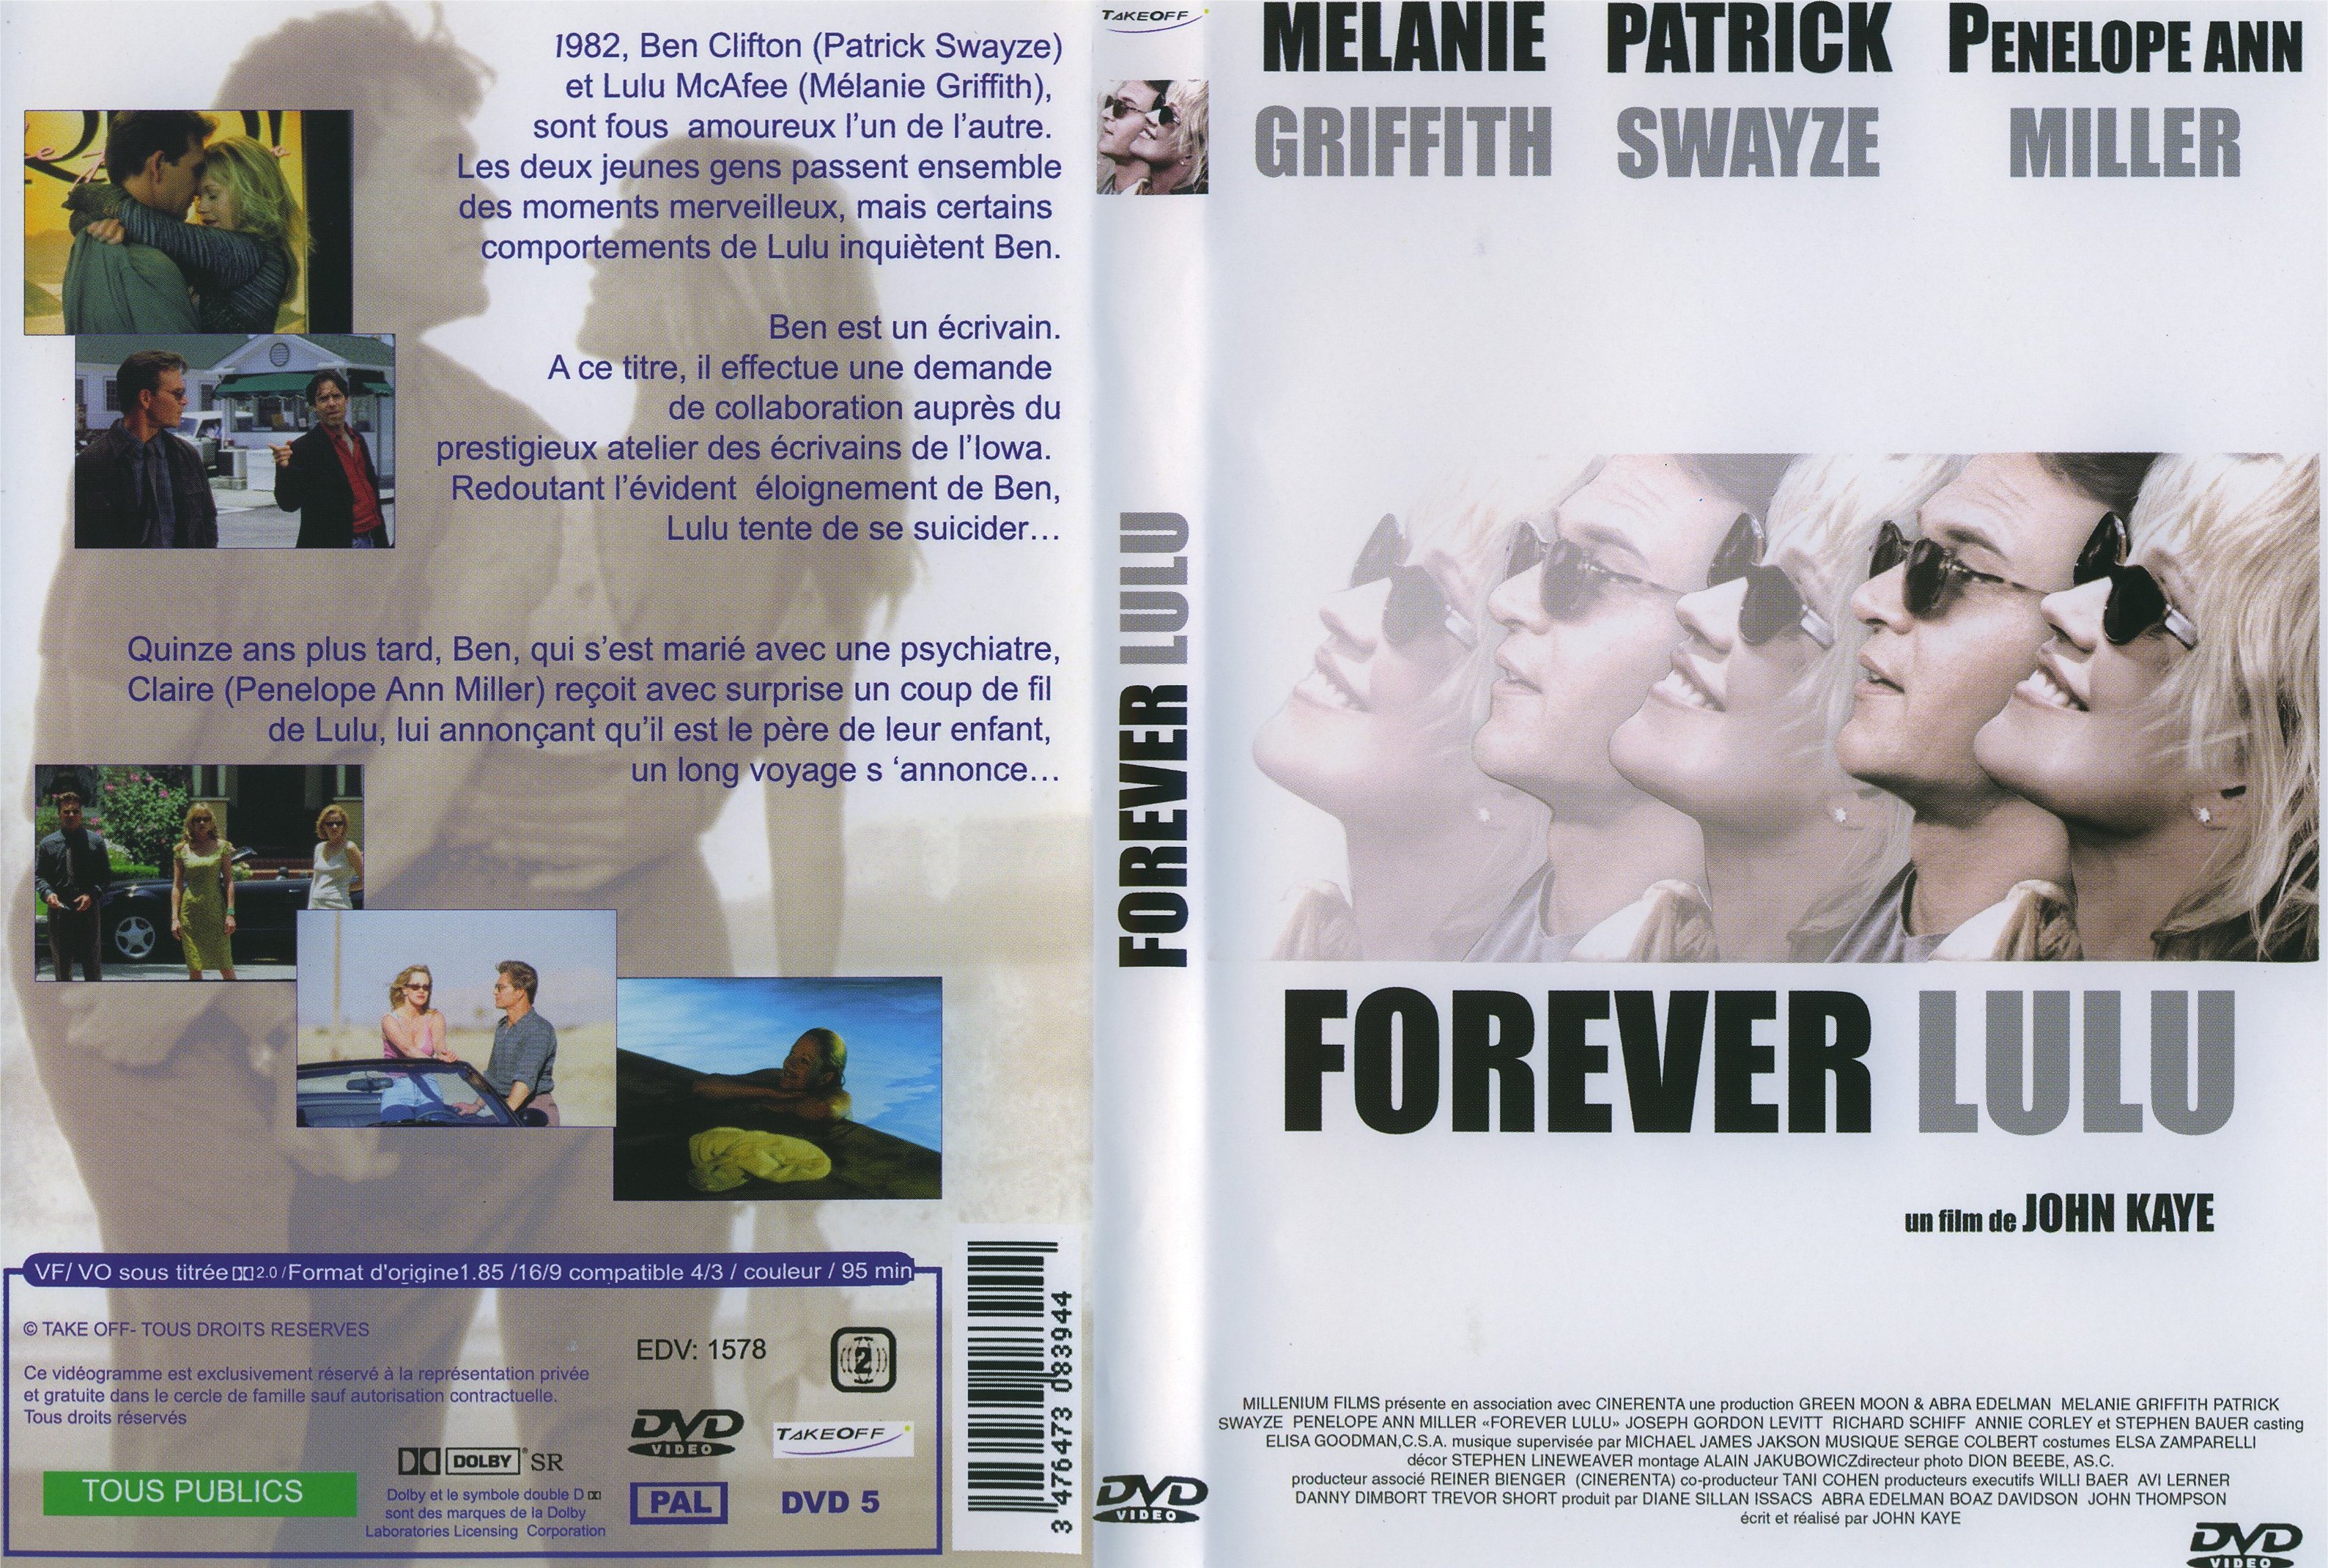 Jaquette DVD Forever Lulu